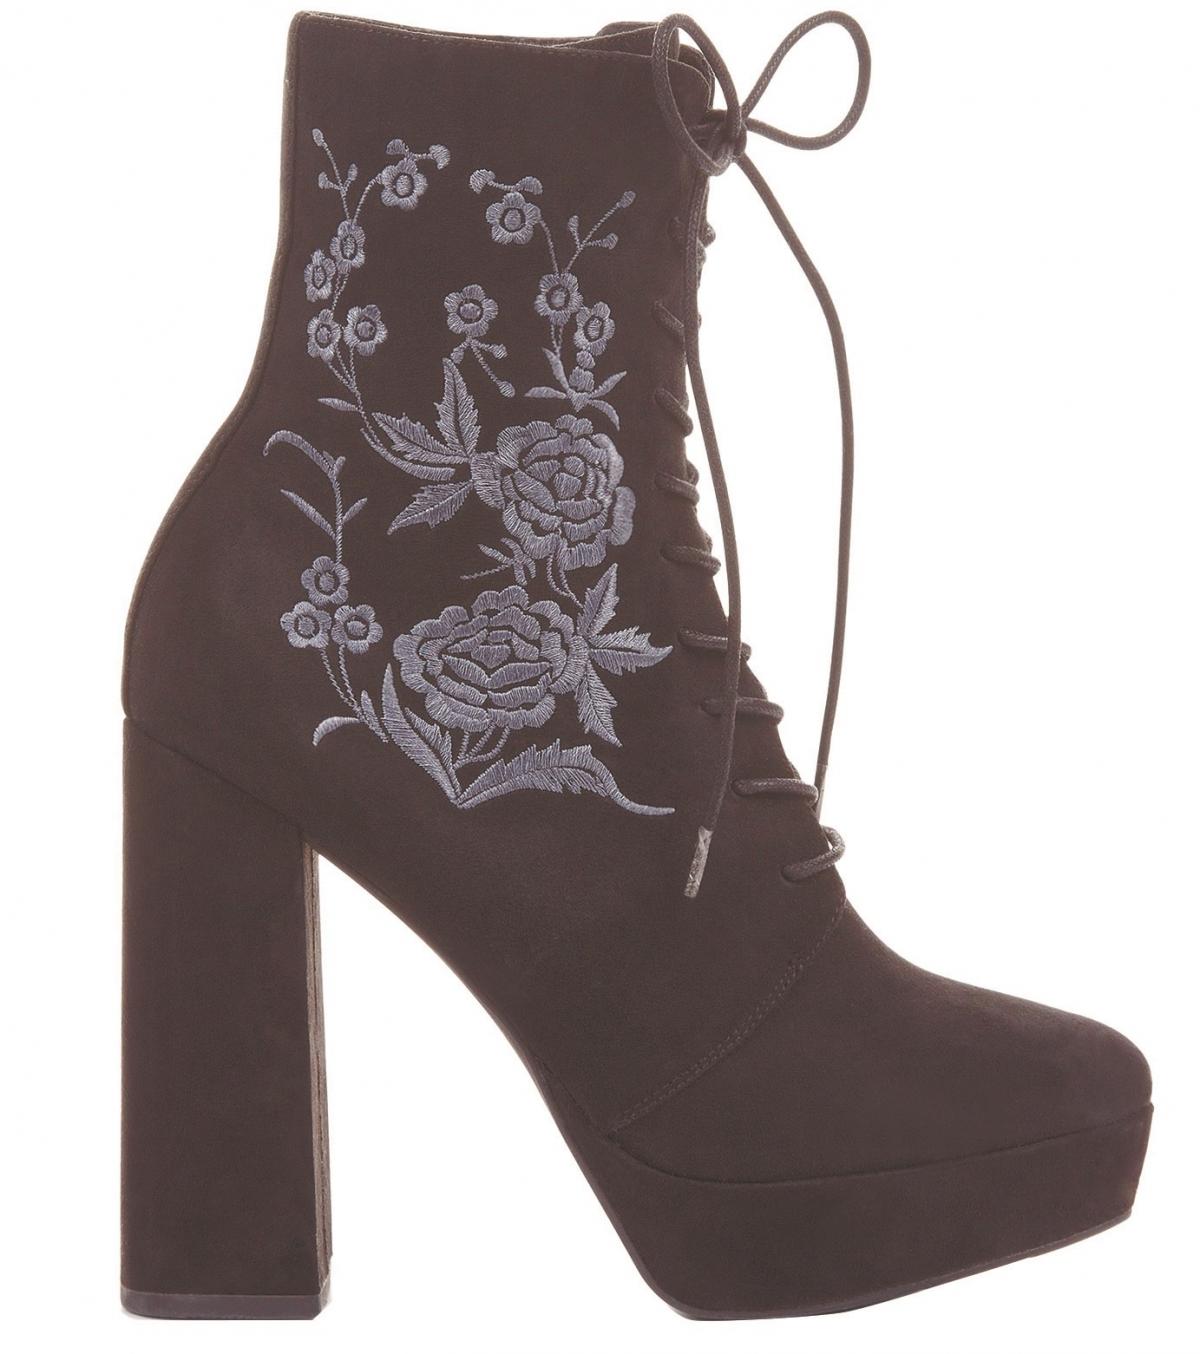 New Look, Black Embroidered Lace Up Platform Boots, £34.99